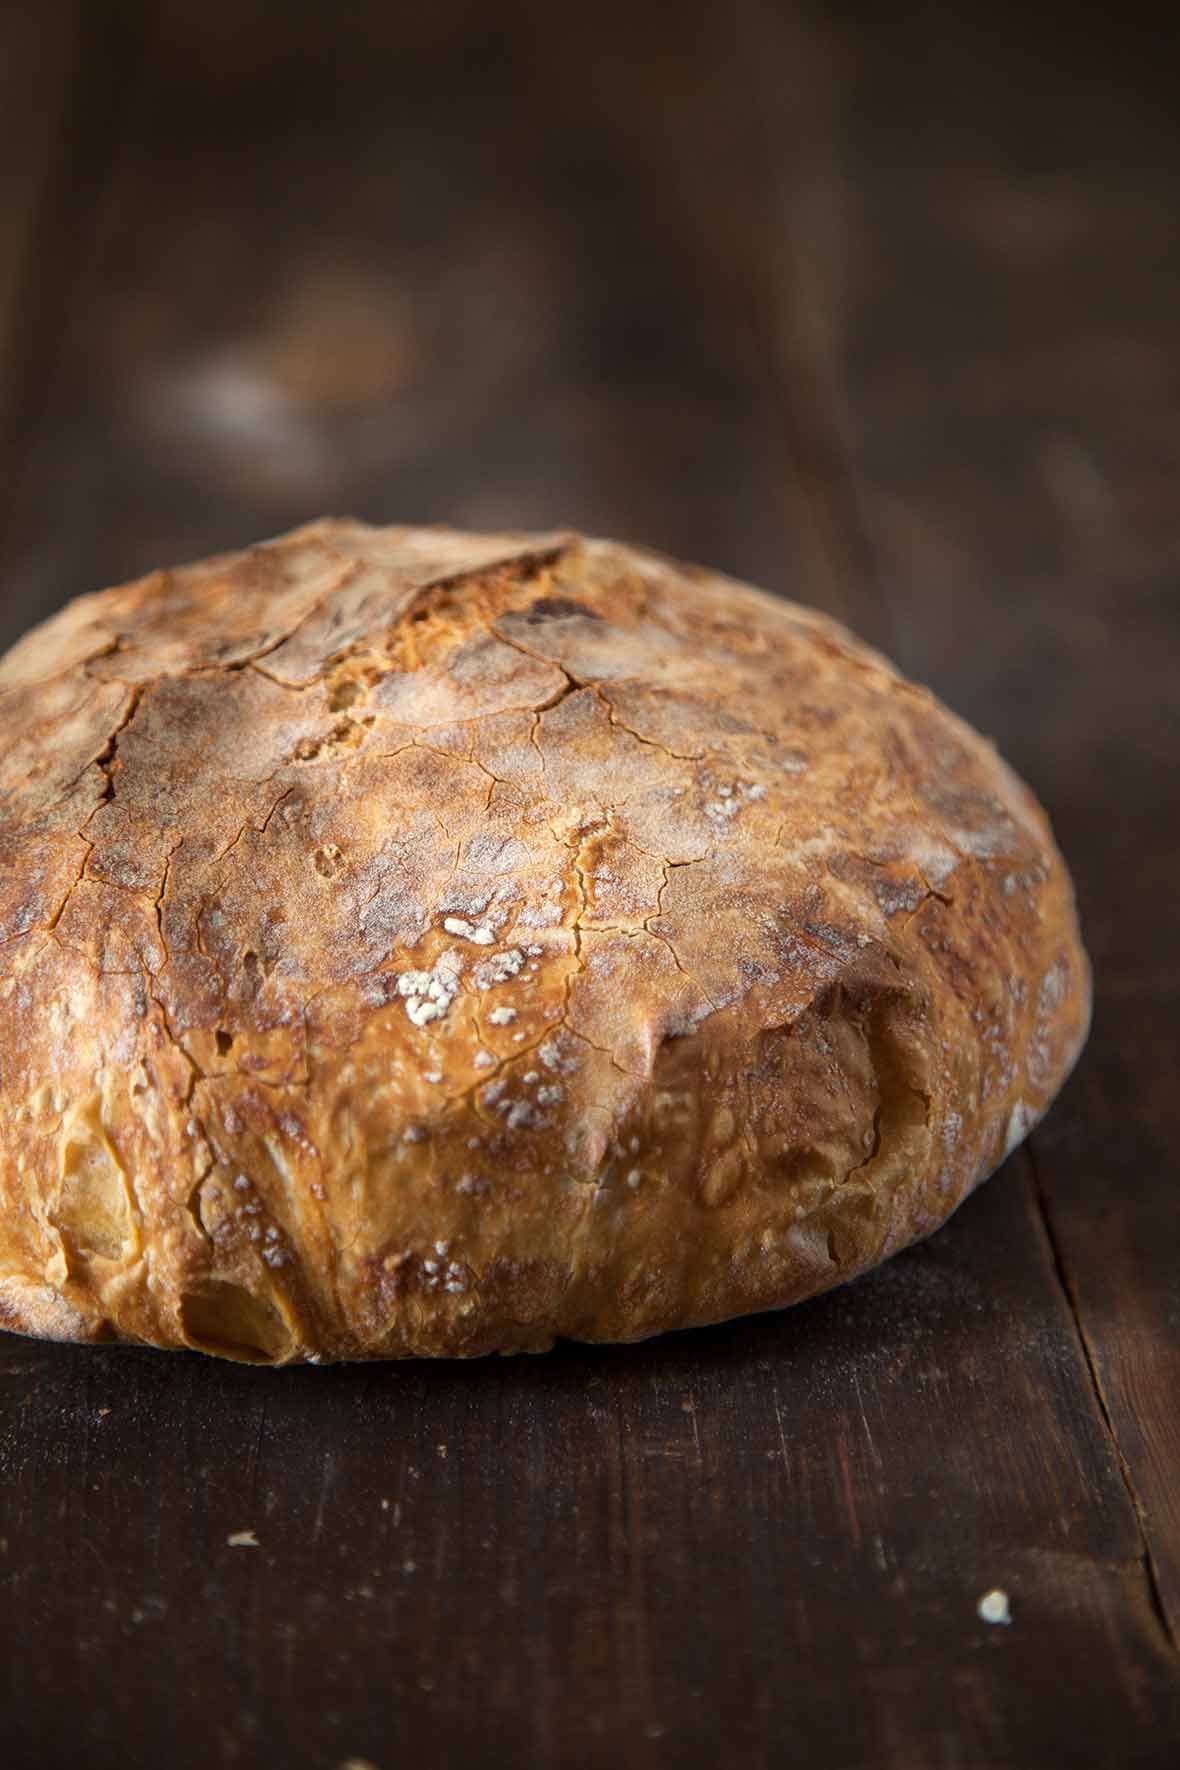 A loaf of Jim Lahey's no knead bread on a wooden board.